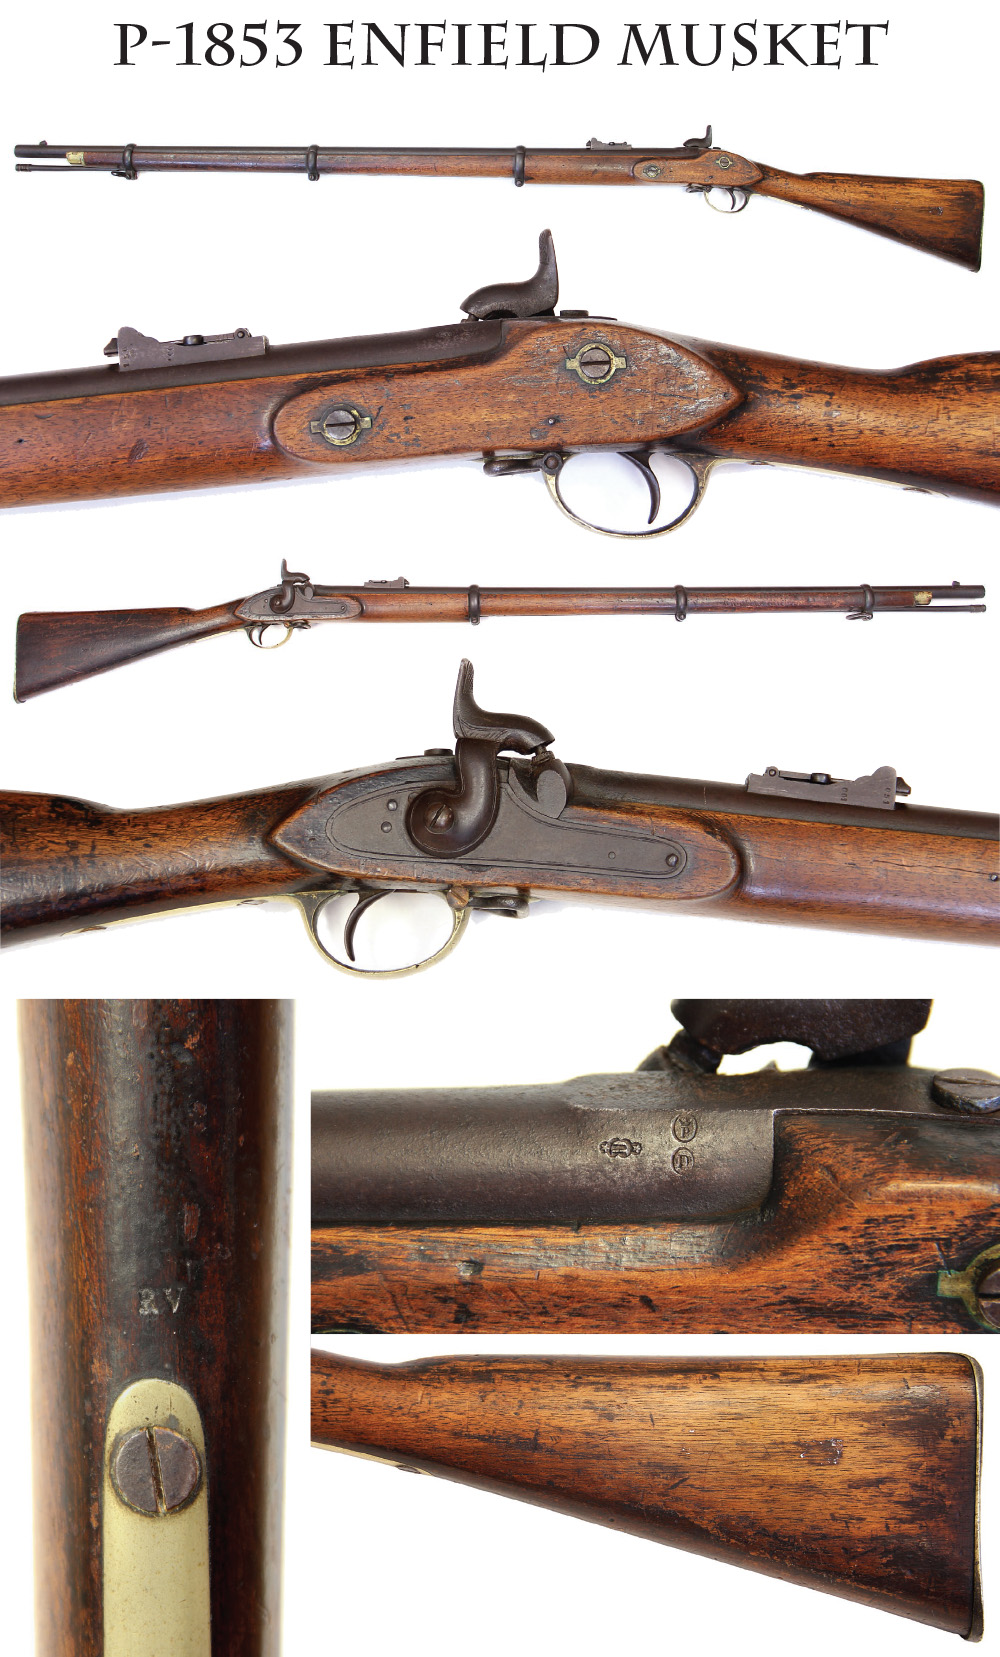 17-10-15. Extremely Rare French Contract P-1853 Enfield Rifle Musket